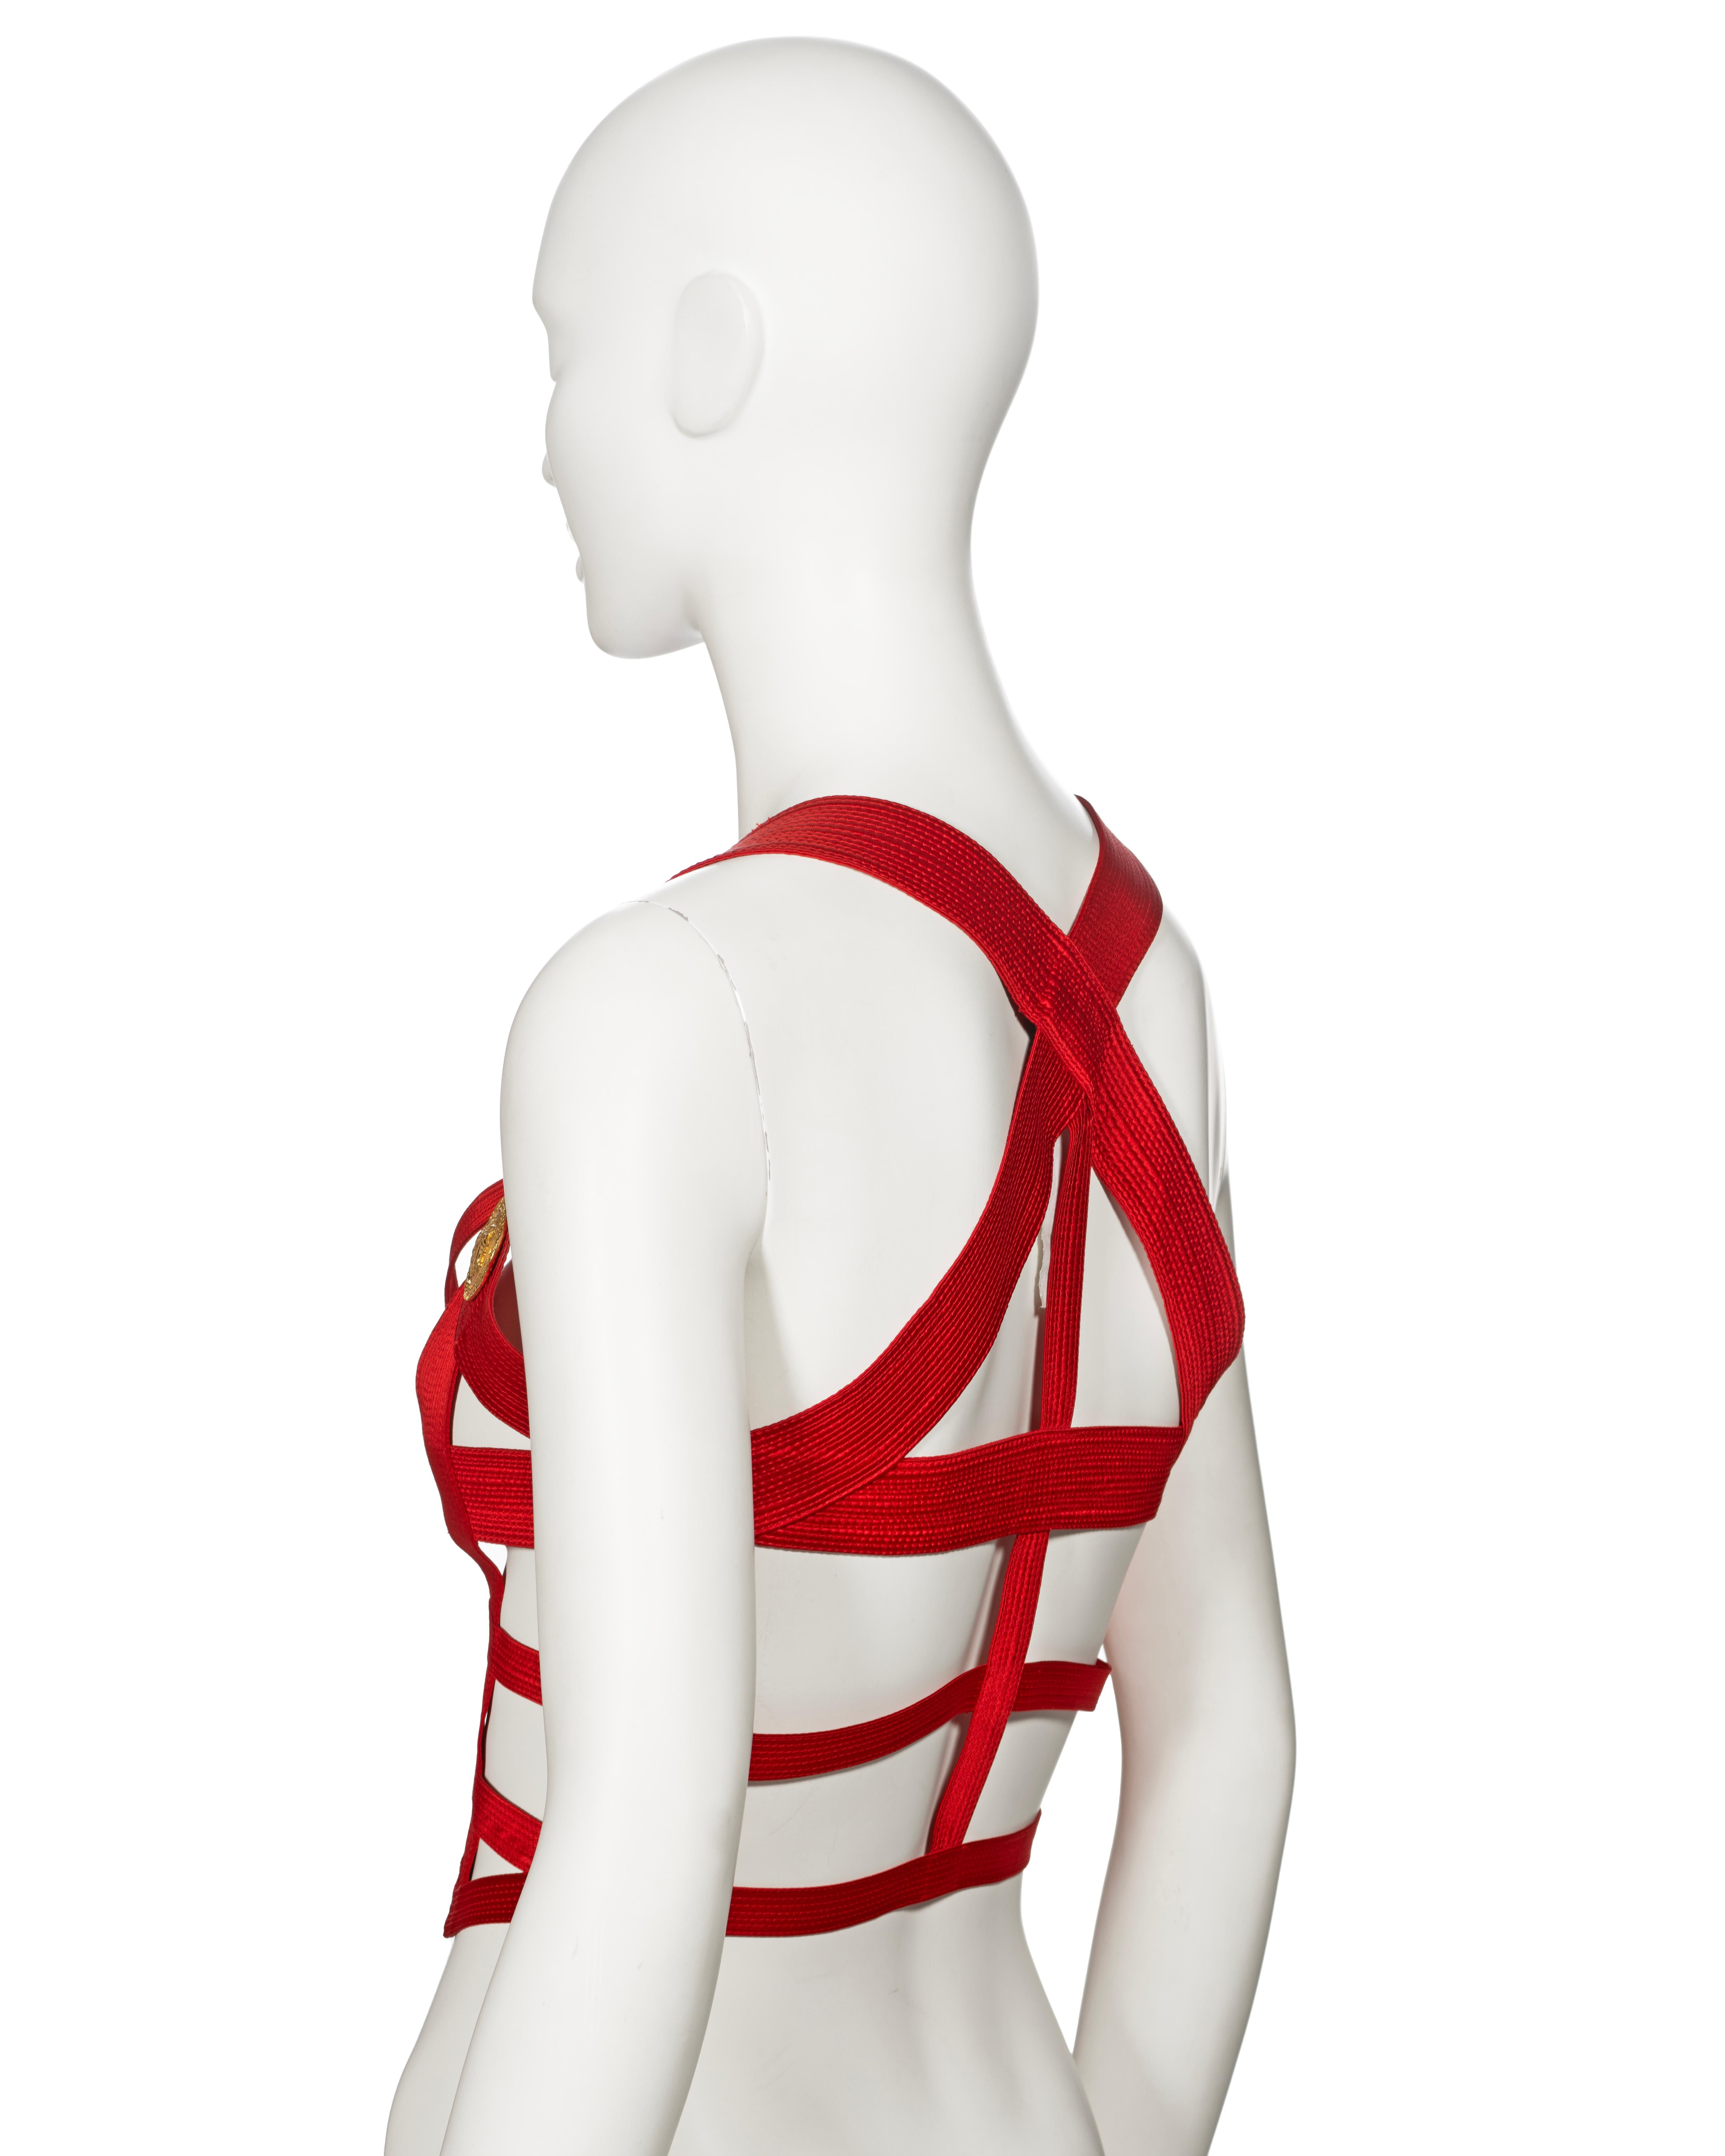 Gianni Versace Red Silk Bondage Corset Top, fw 1992 For Sale 9